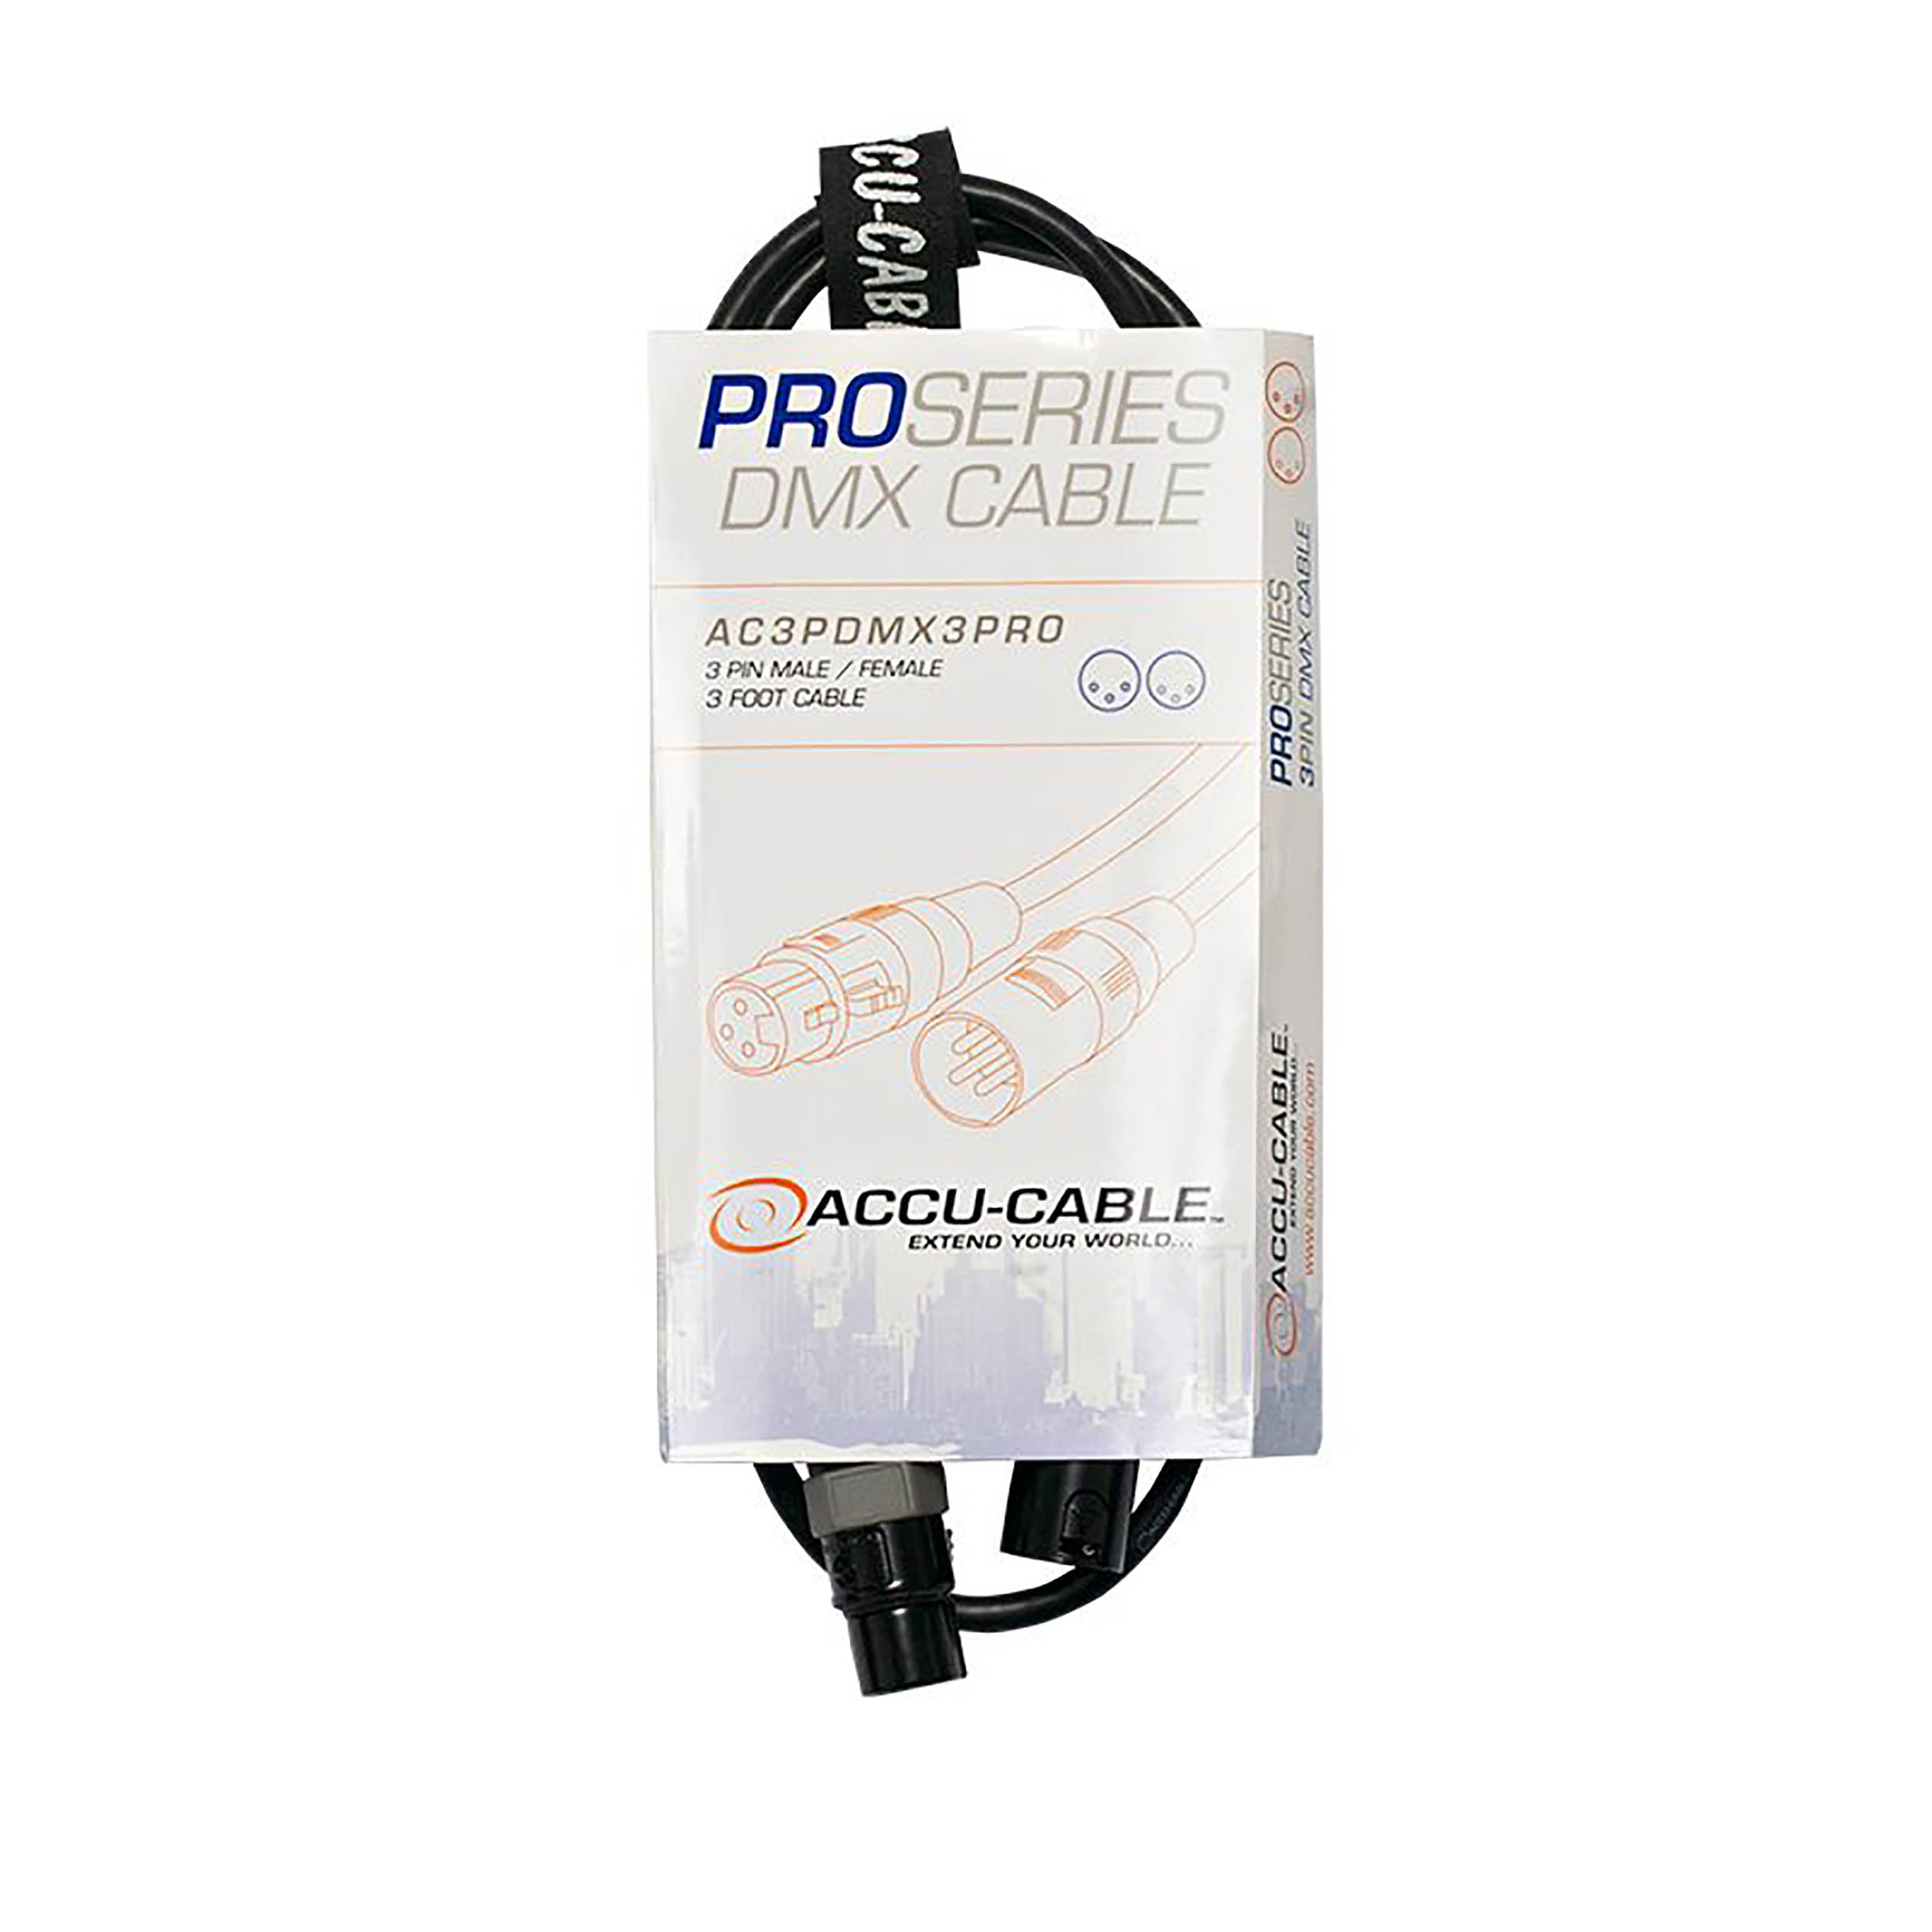 Accu-Cable AC3PDMX3PRO, 3-Pin Male to 3-Pin Female DMX Cable - 3 Ft by Accu Cable